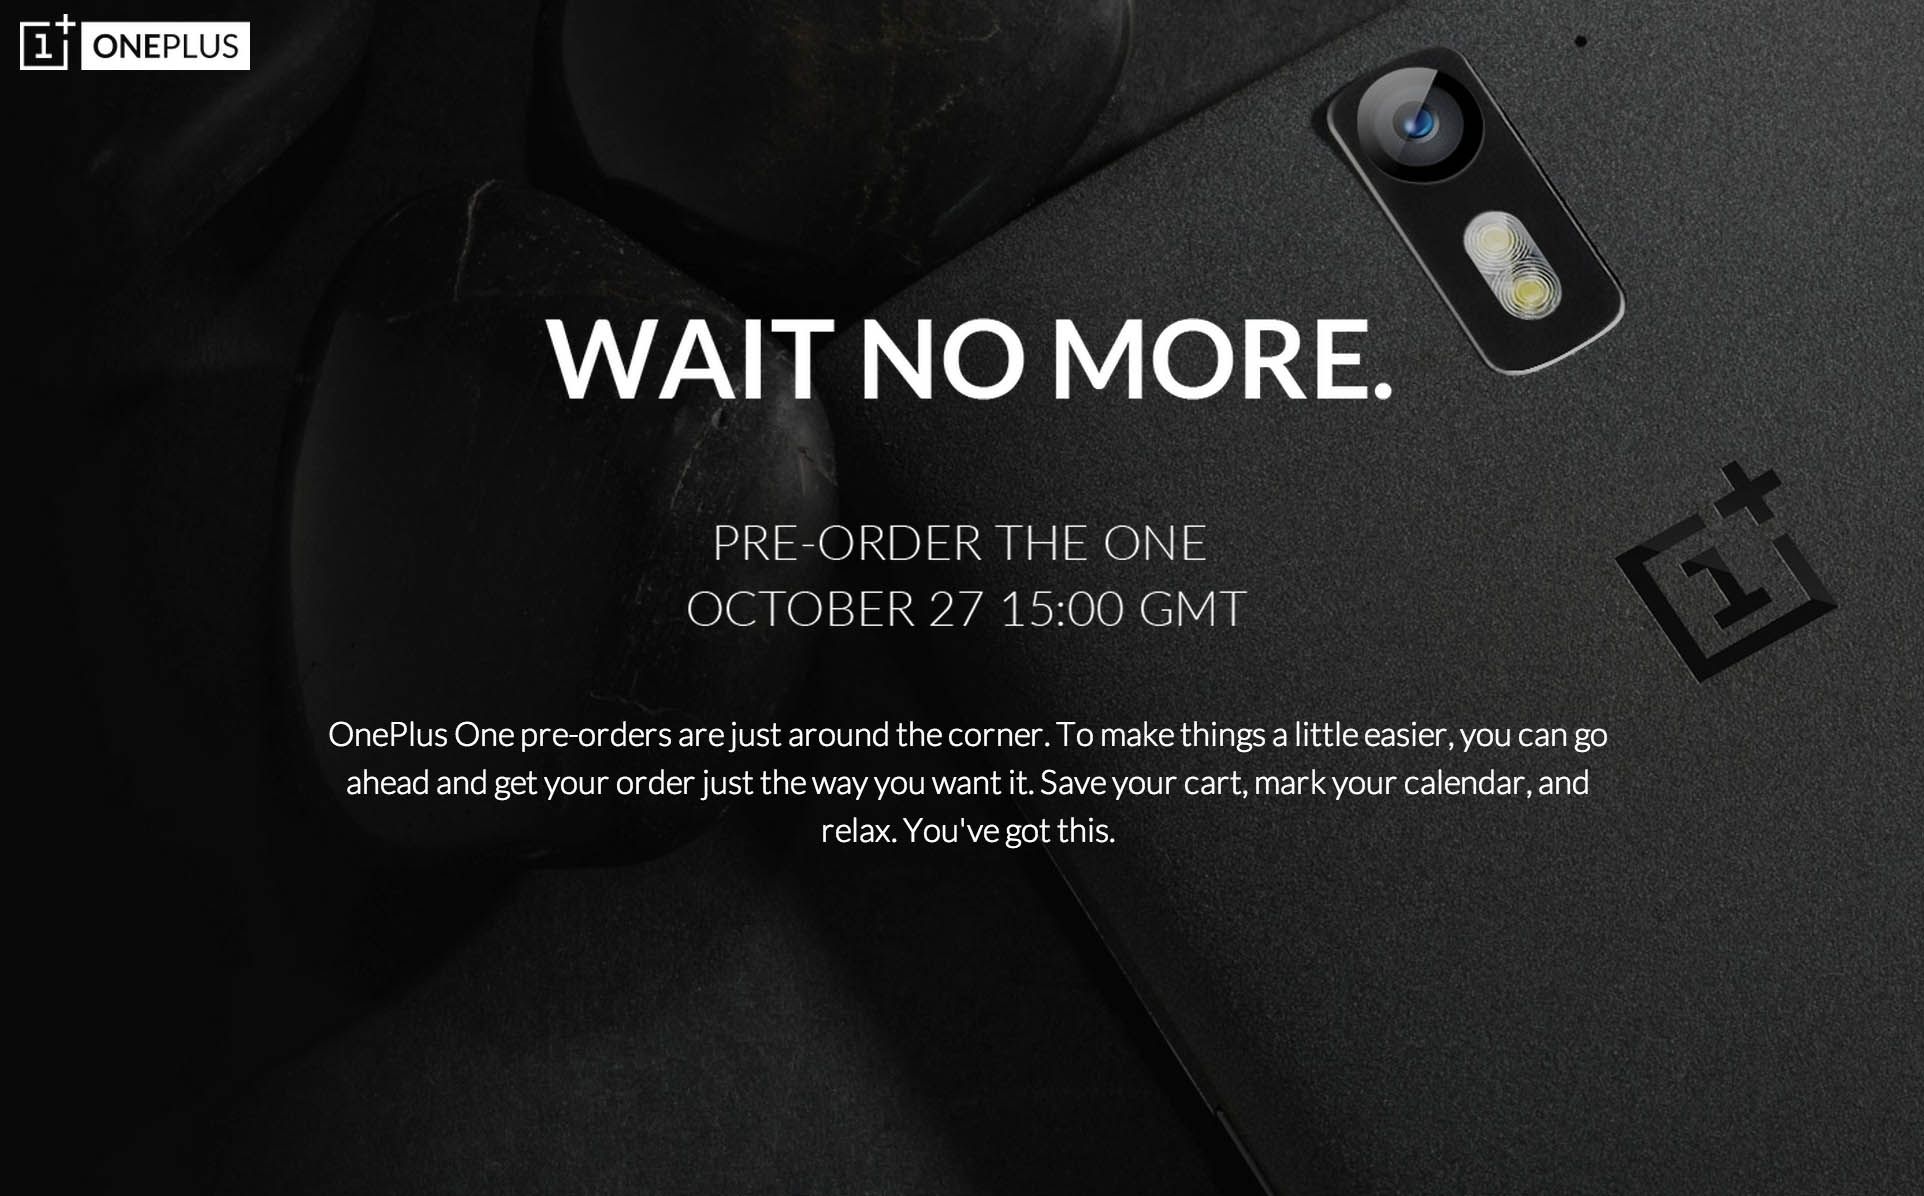 oneplus one pre orders open today for one hour only image 2